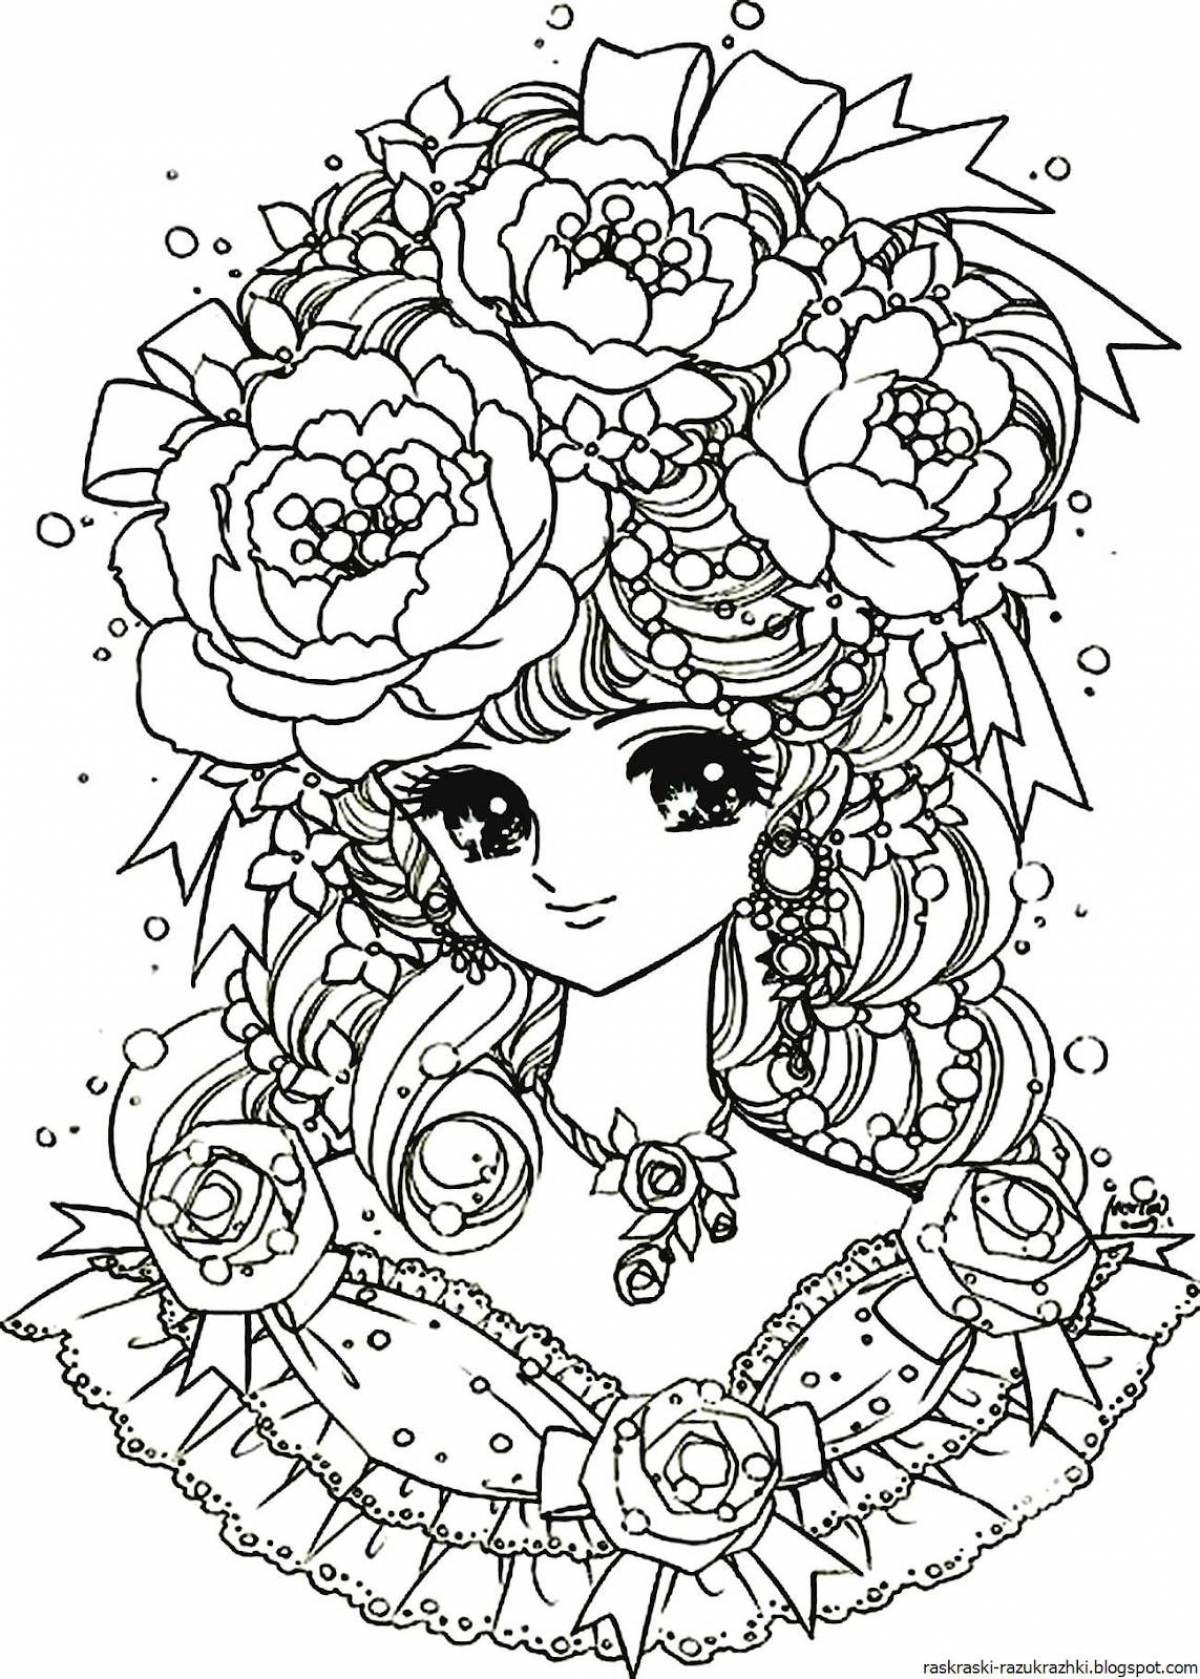 Color-frenzy coloring page for girls 10 years old